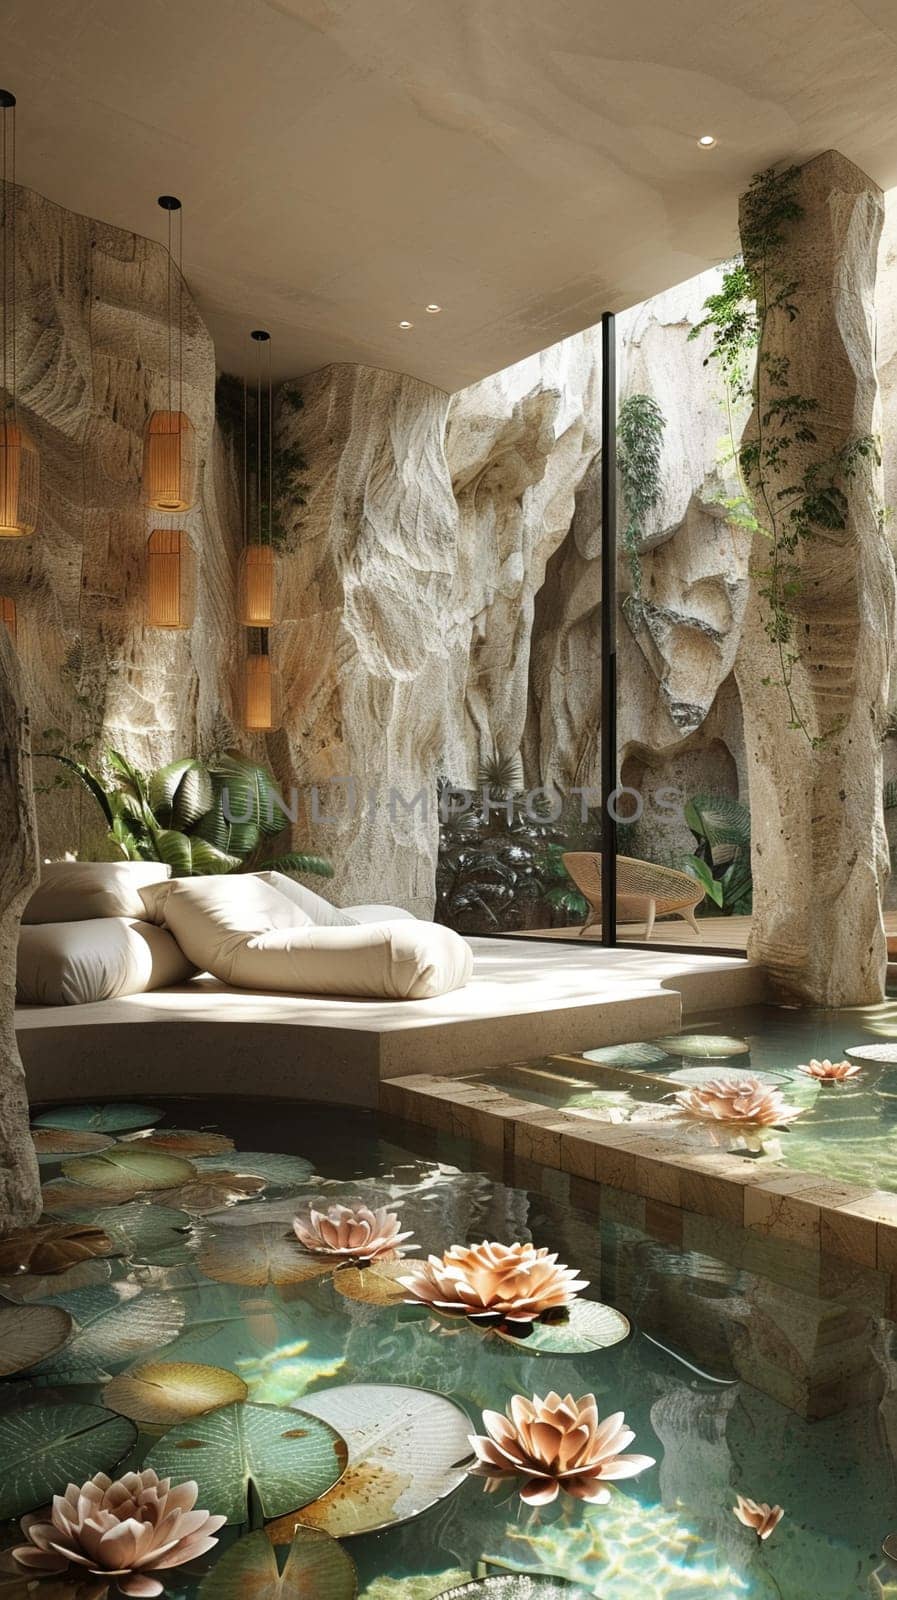 Serene water-themed spa with indoor ponds and floating flower arrangements